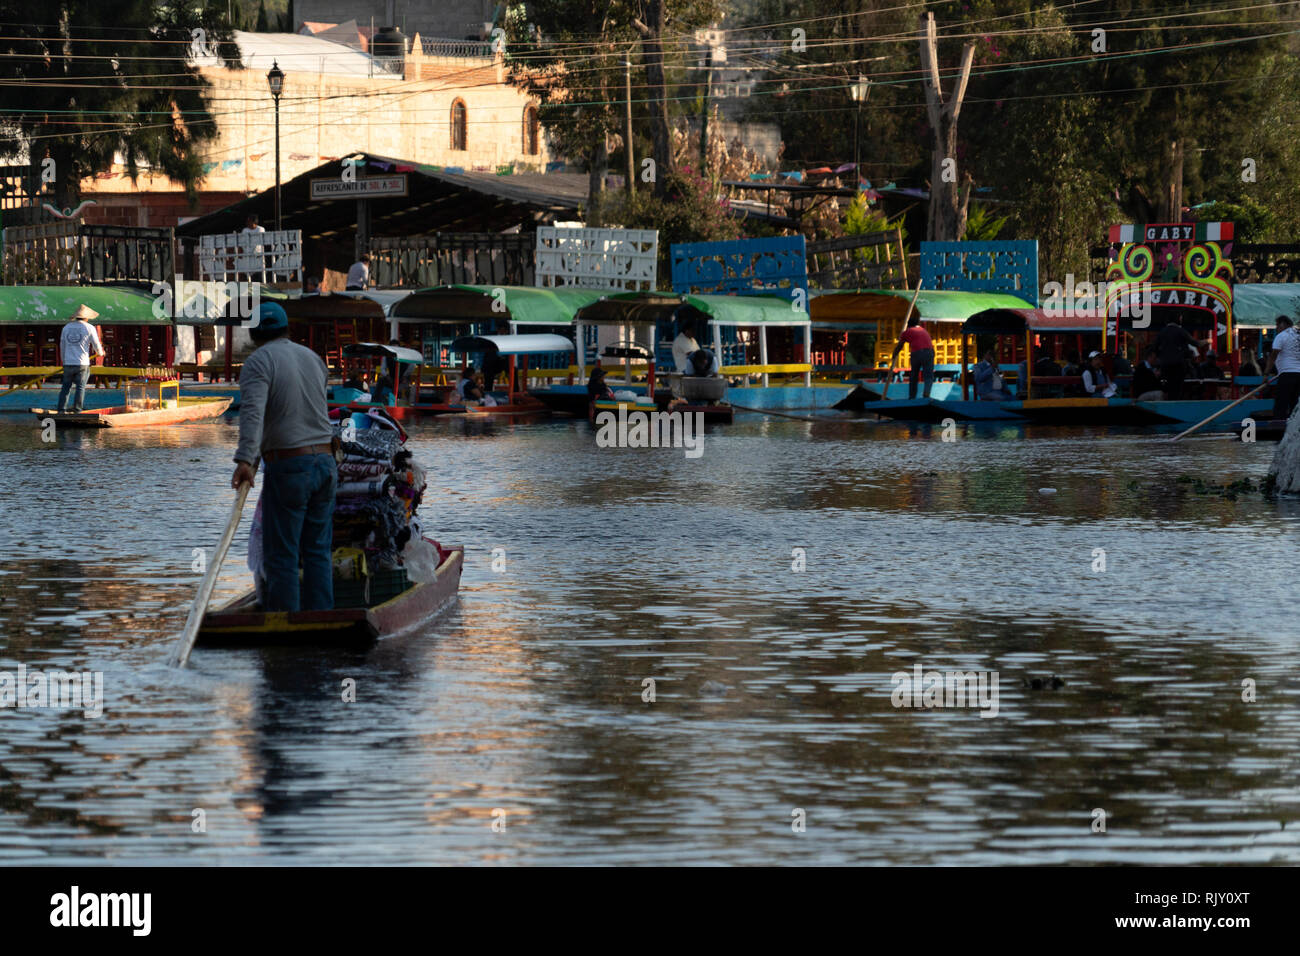 MEXICO CITY, MEXICO - JANUARY 30 2019 - Xochimilco the mexican little venice attract tourists and other city residents to ride on colorful gondola-lik Stock Photo